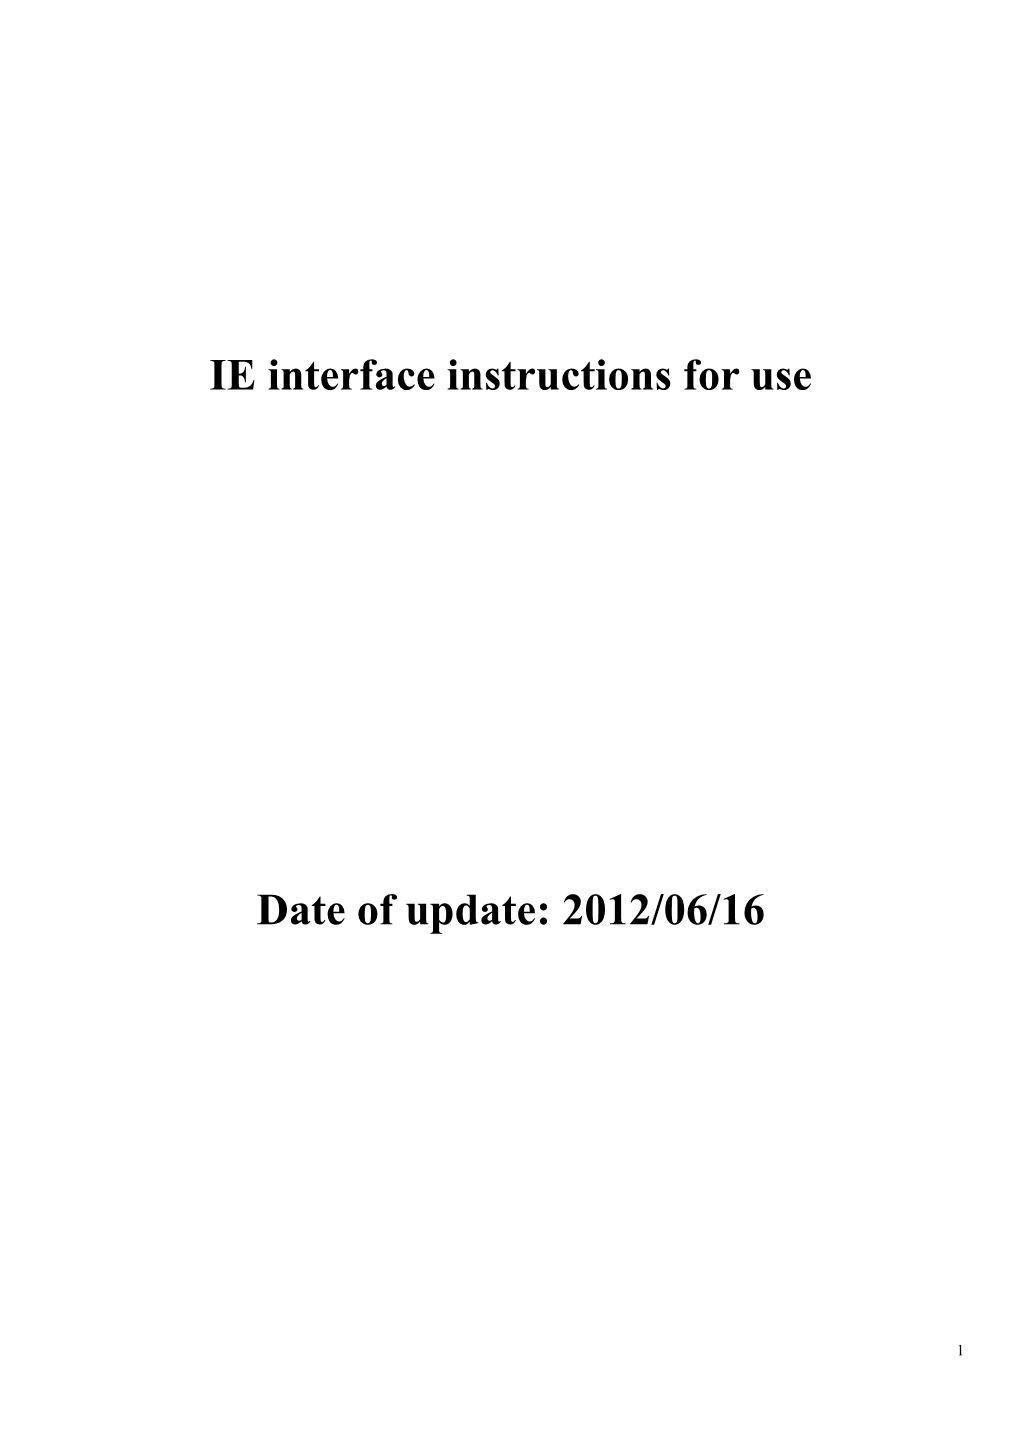 IE Interface Instructions for Use